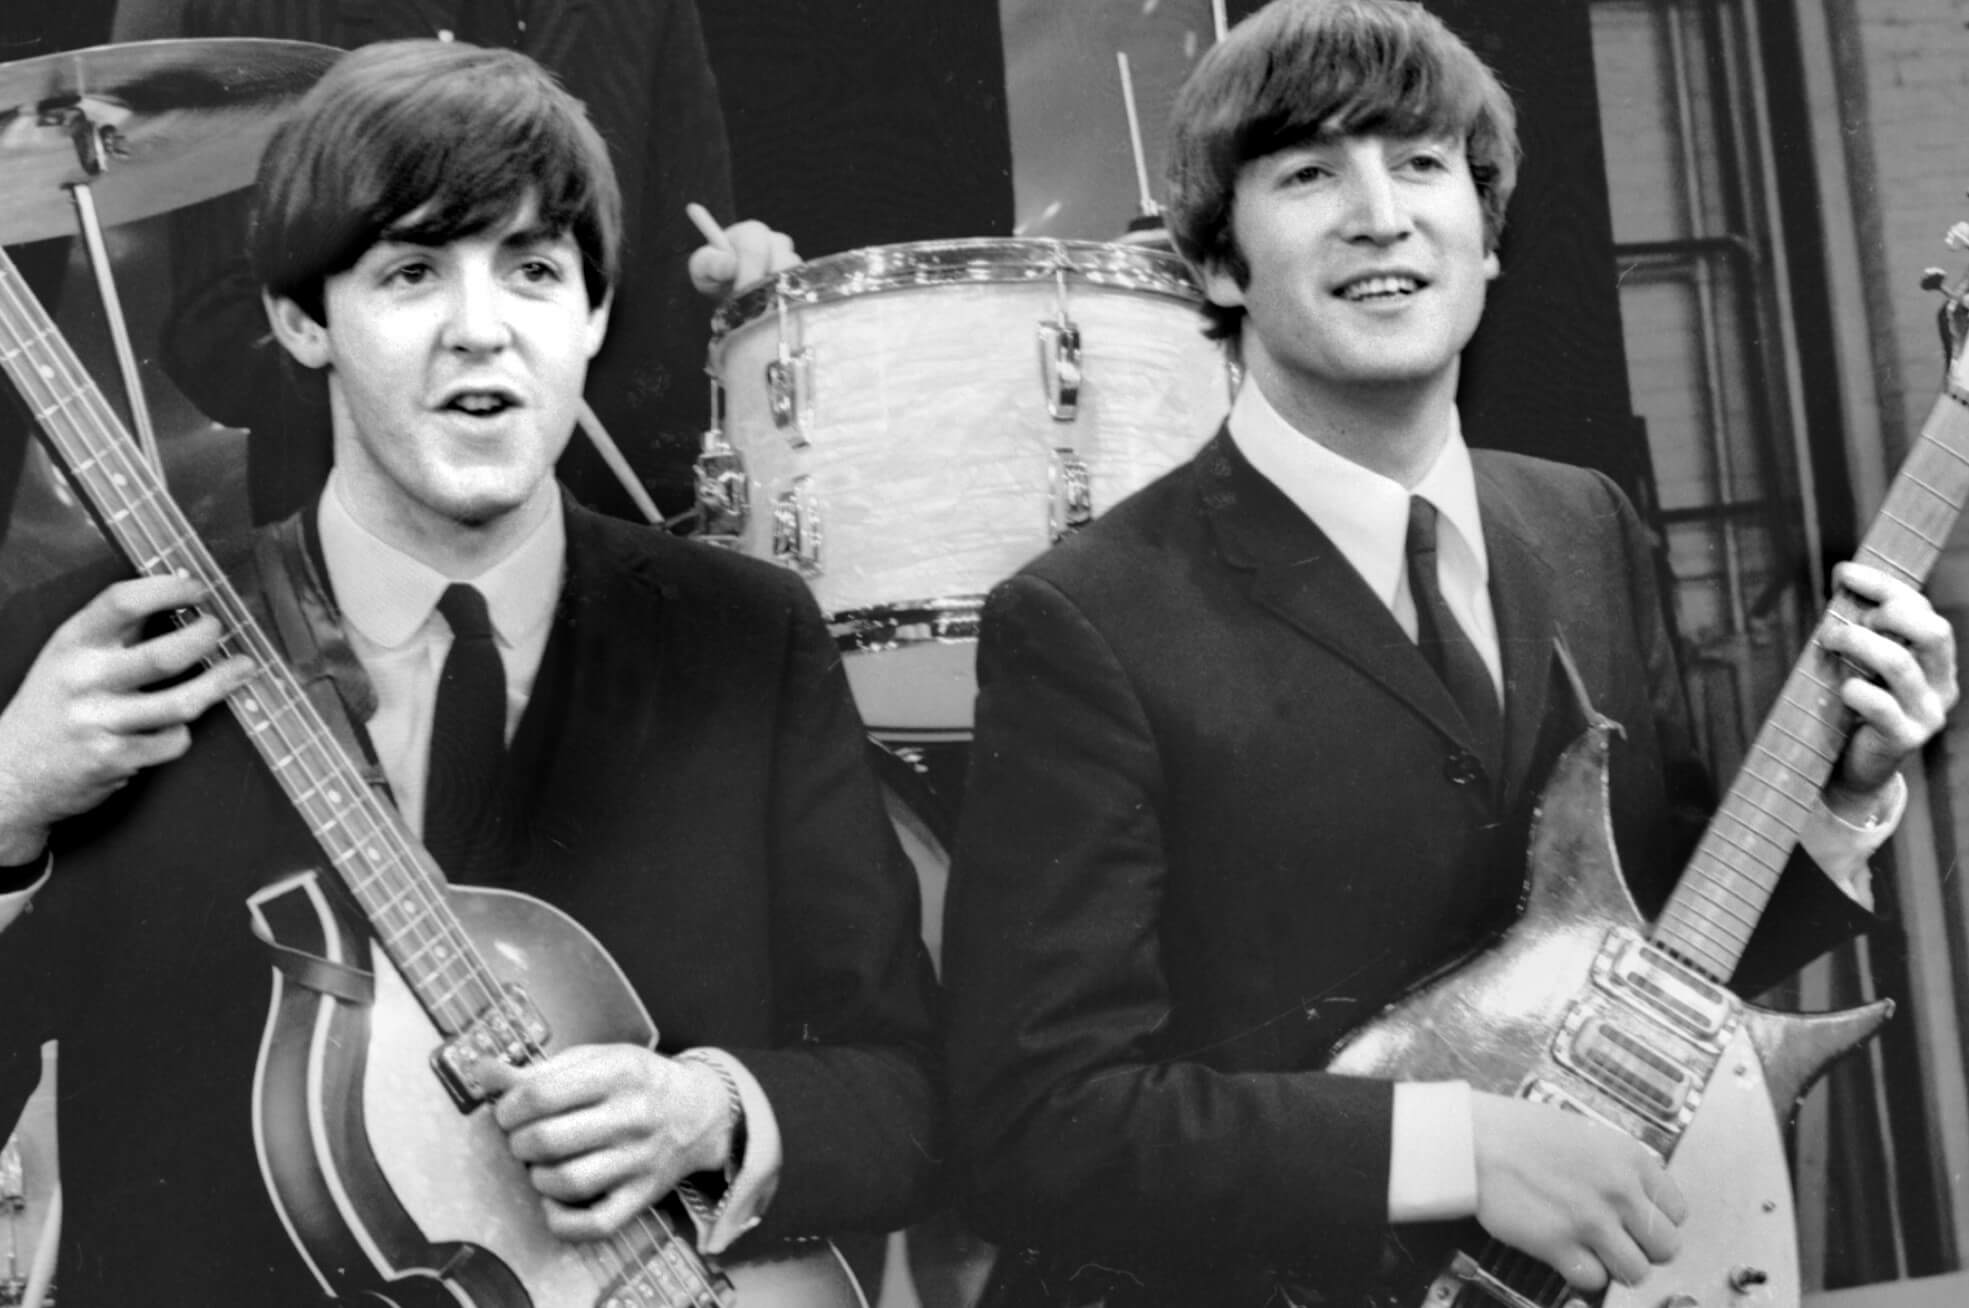 Paul McCartney and John Lennon during The Beatles' "I Saw Her Standing There" era